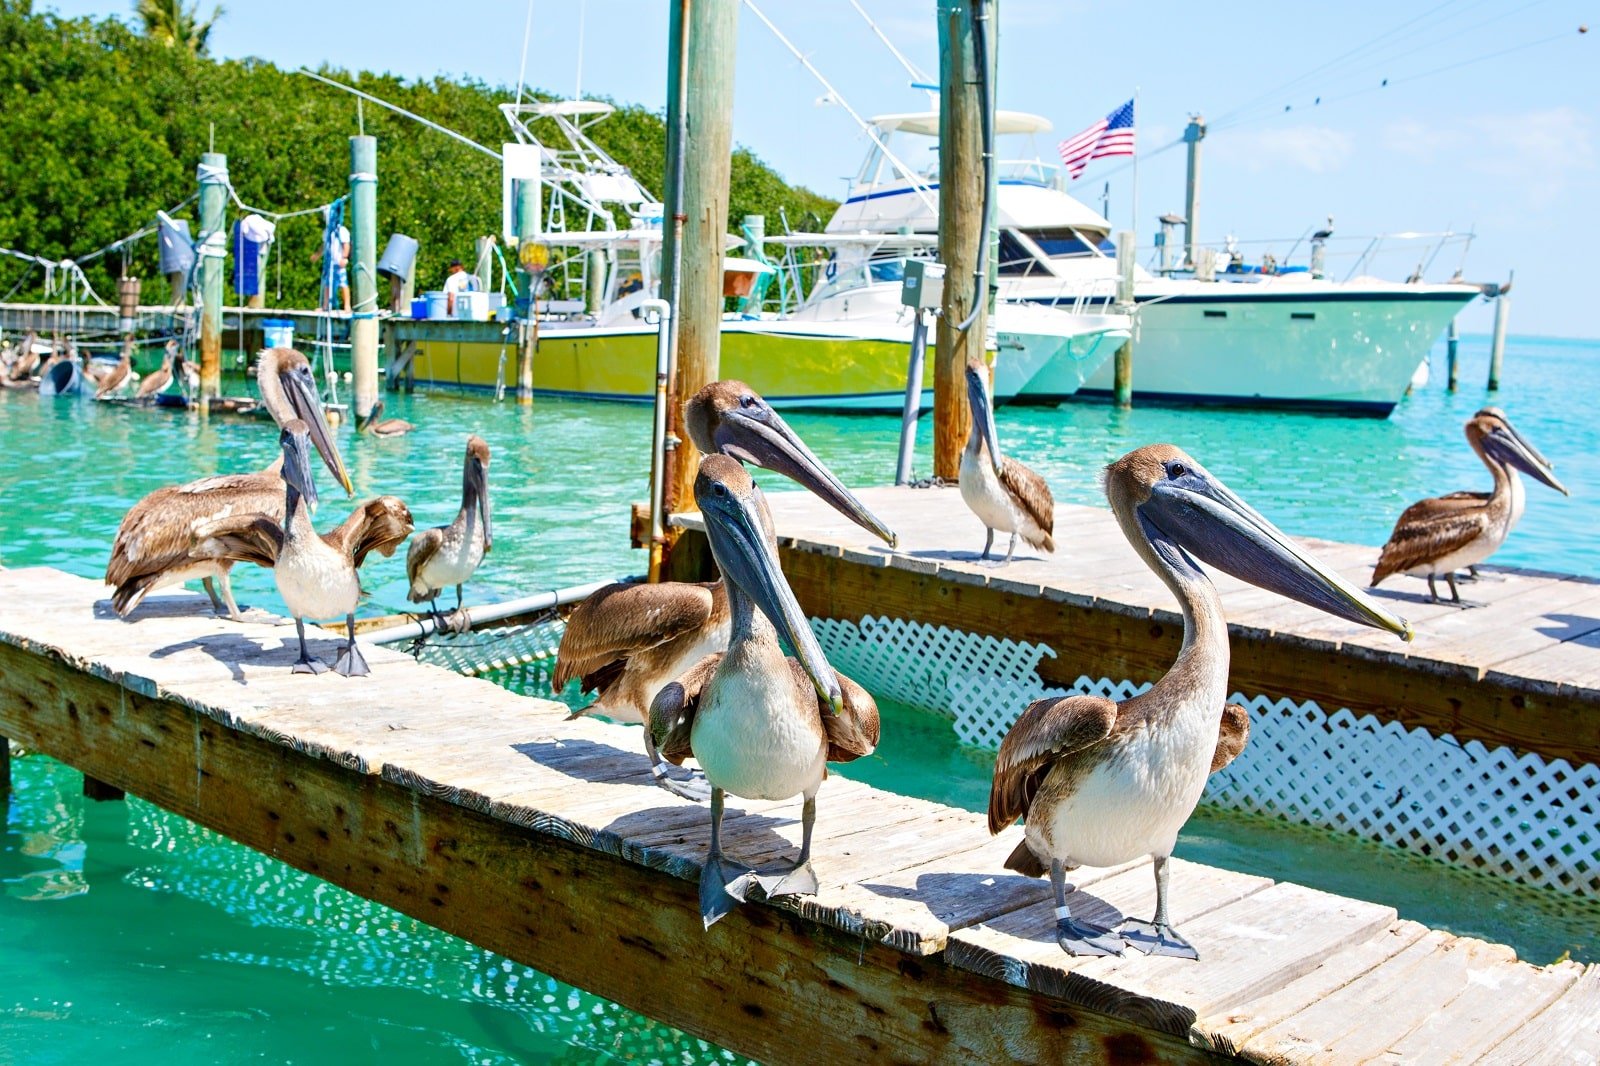 <p><span>The Florida Keys offer a unique sailing experience with their shallow waters and coral reefs. The Keys’ relaxed atmosphere is perfect for beginners. Sailing schools here focus on practical skills in a laid-back environment.</span></p> <p><b>Insider’s Tip: </b><span>Extend your sailing trip to include a visit to Key West for its vibrant maritime culture.</span></p> <p><b>When to Travel: </b><span>November to May for the best weather and sailing conditions.</span></p> <p><b>How to Get There: </b><span>Fly to Miami International Airport and drive to the Keys or fly directly to Key West International Airport.</span></p>